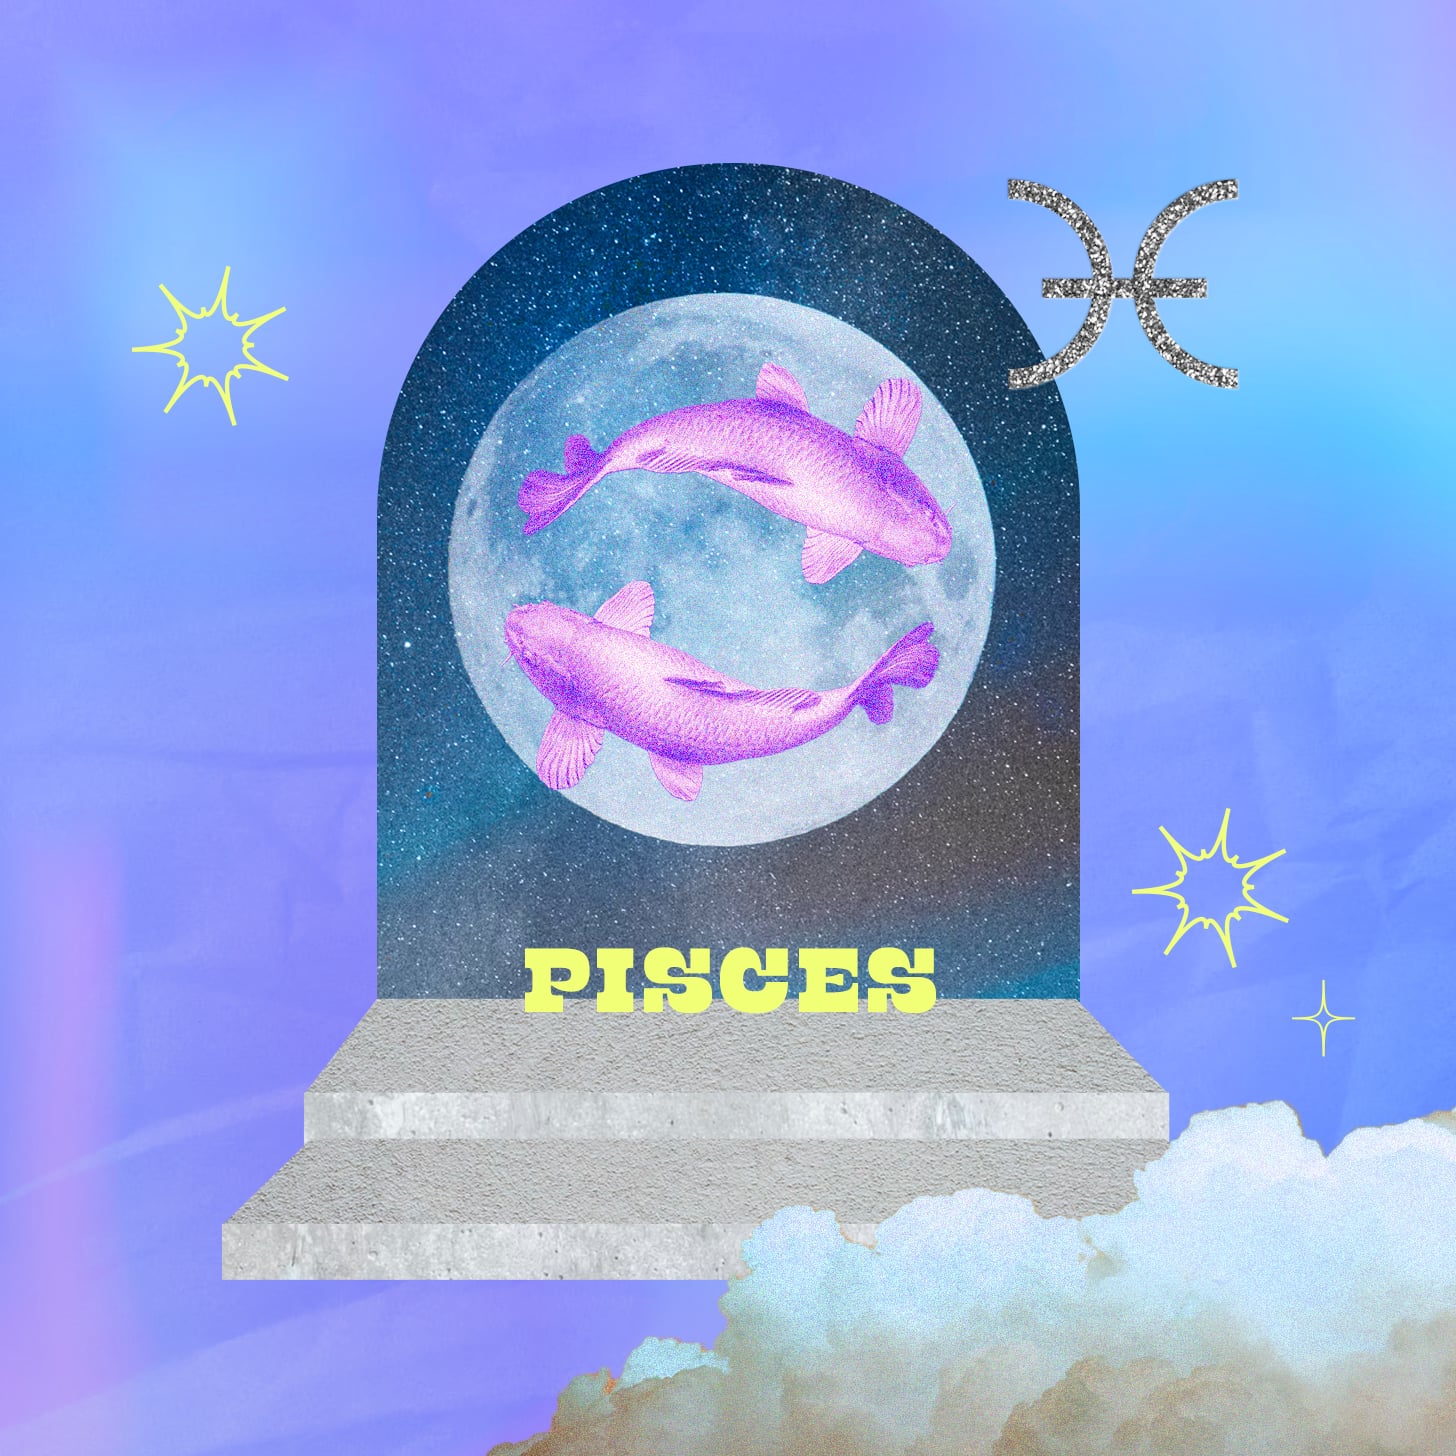 Pisces weekly horoscope for june 26, 2022